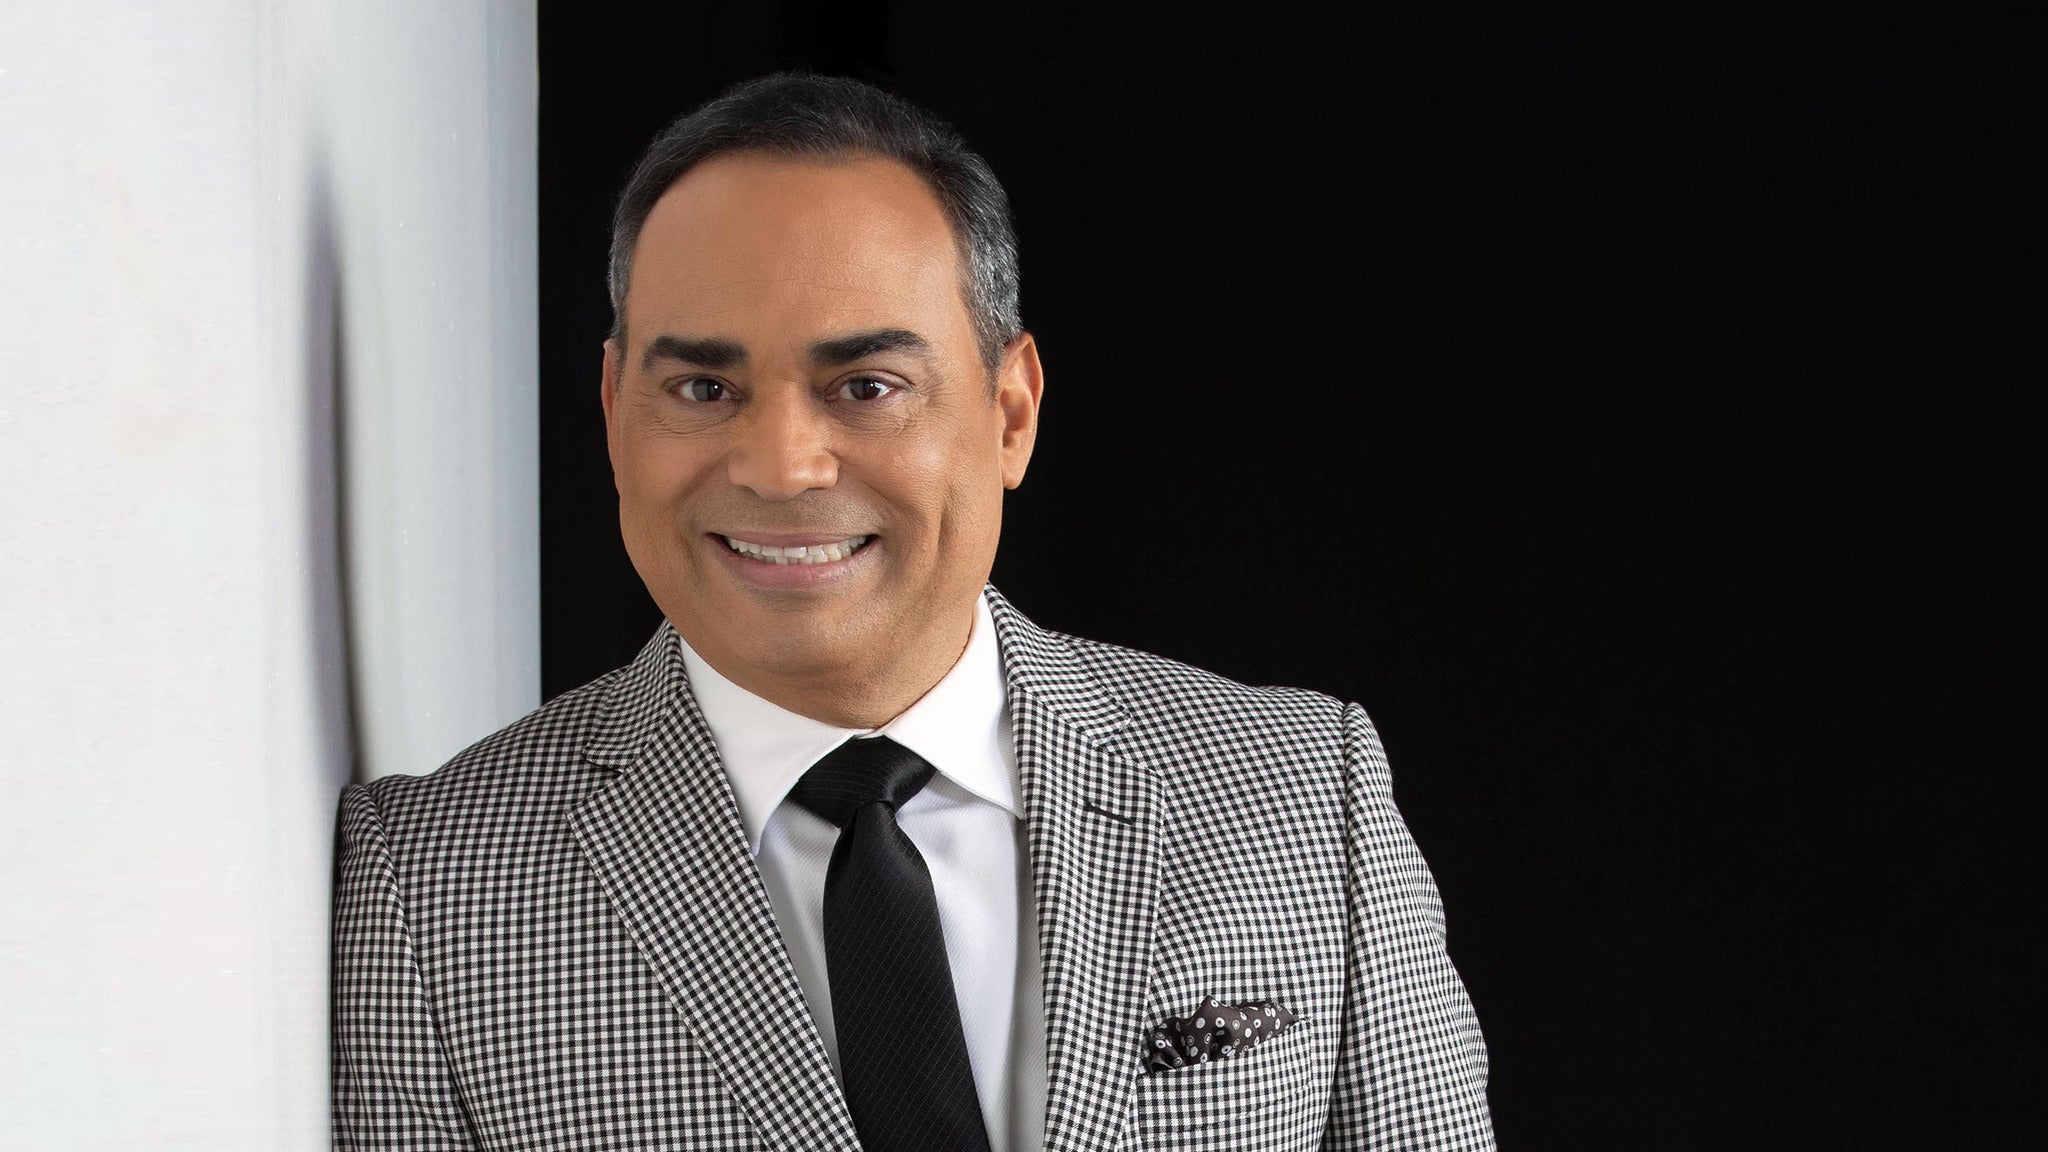 Image used with permission from Ticketmaster | Gilberto Santa Rosa tickets